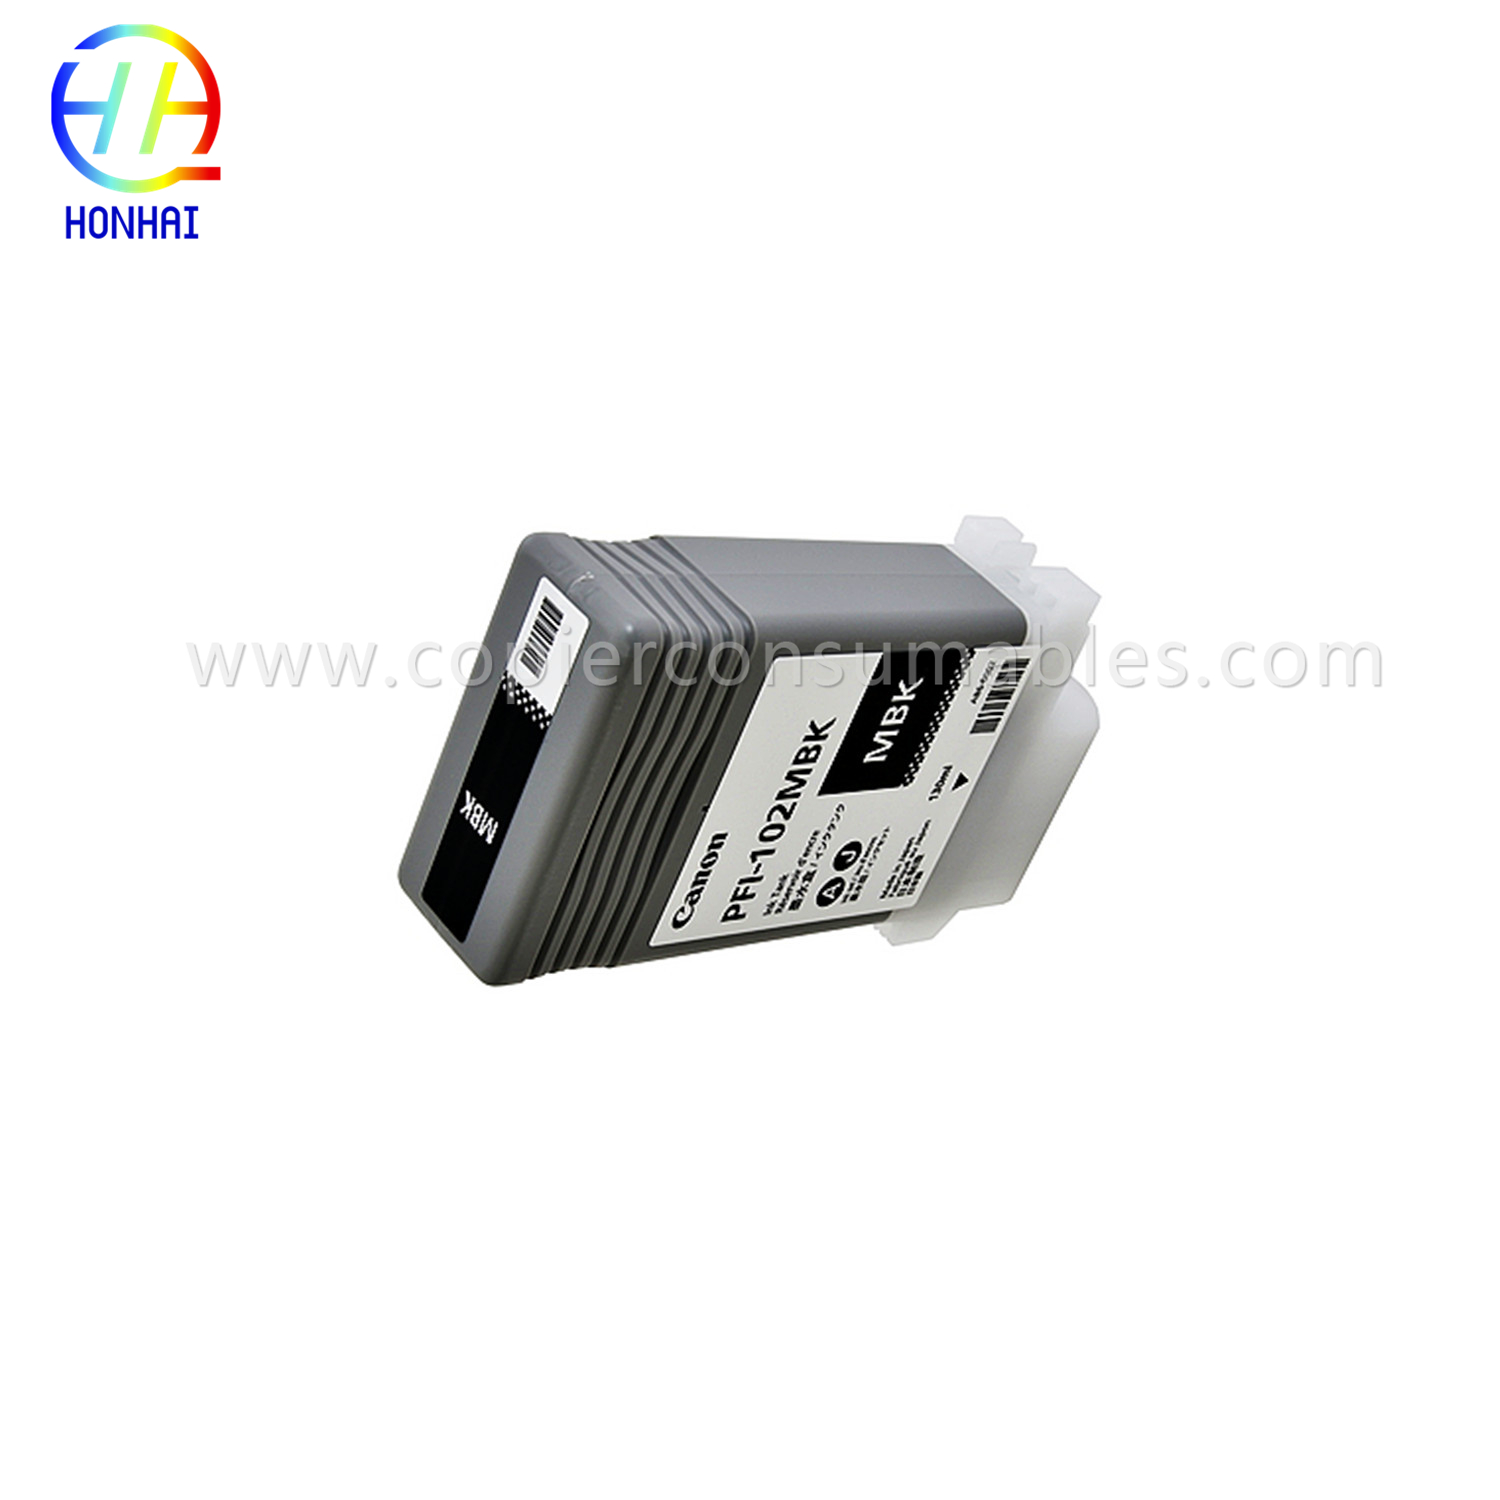 Printer Ink Cartridge for Canon Ipf-500 510 600 605 610 650 655 700 710 720 750 755